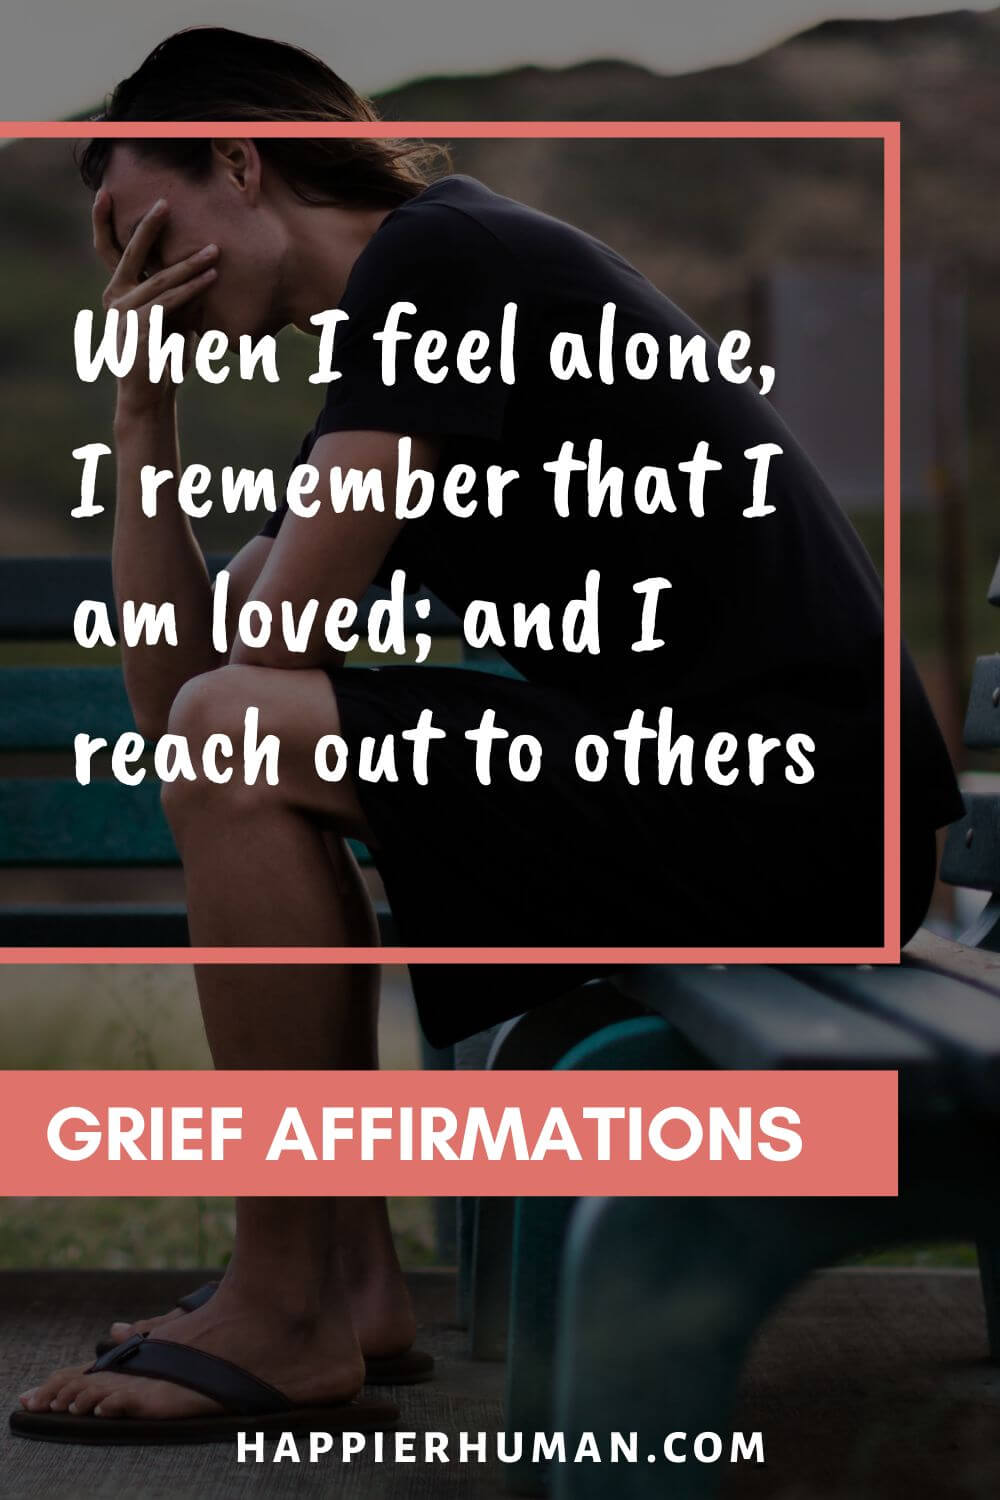 Grief Affirmations - When I feel alone, I remember that I am loved; and I reach out to others | affirmations for healing | mantras for grief | positive affirmations for widows